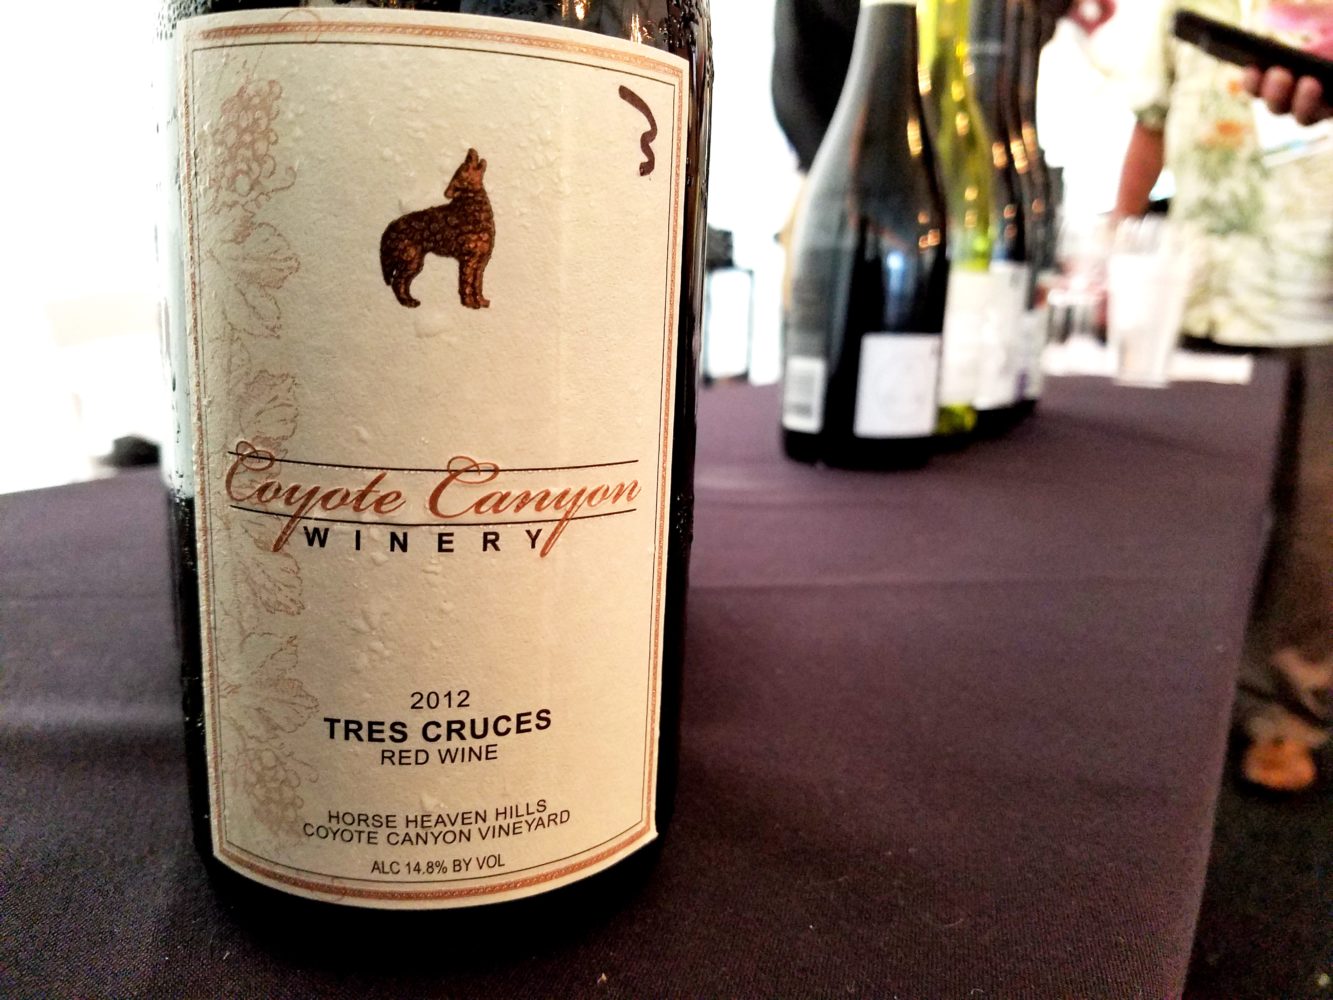 Coyote Canyon Winery, Tres Cruces 2012, Horse Heaven Hills, Washington, Wine Casual